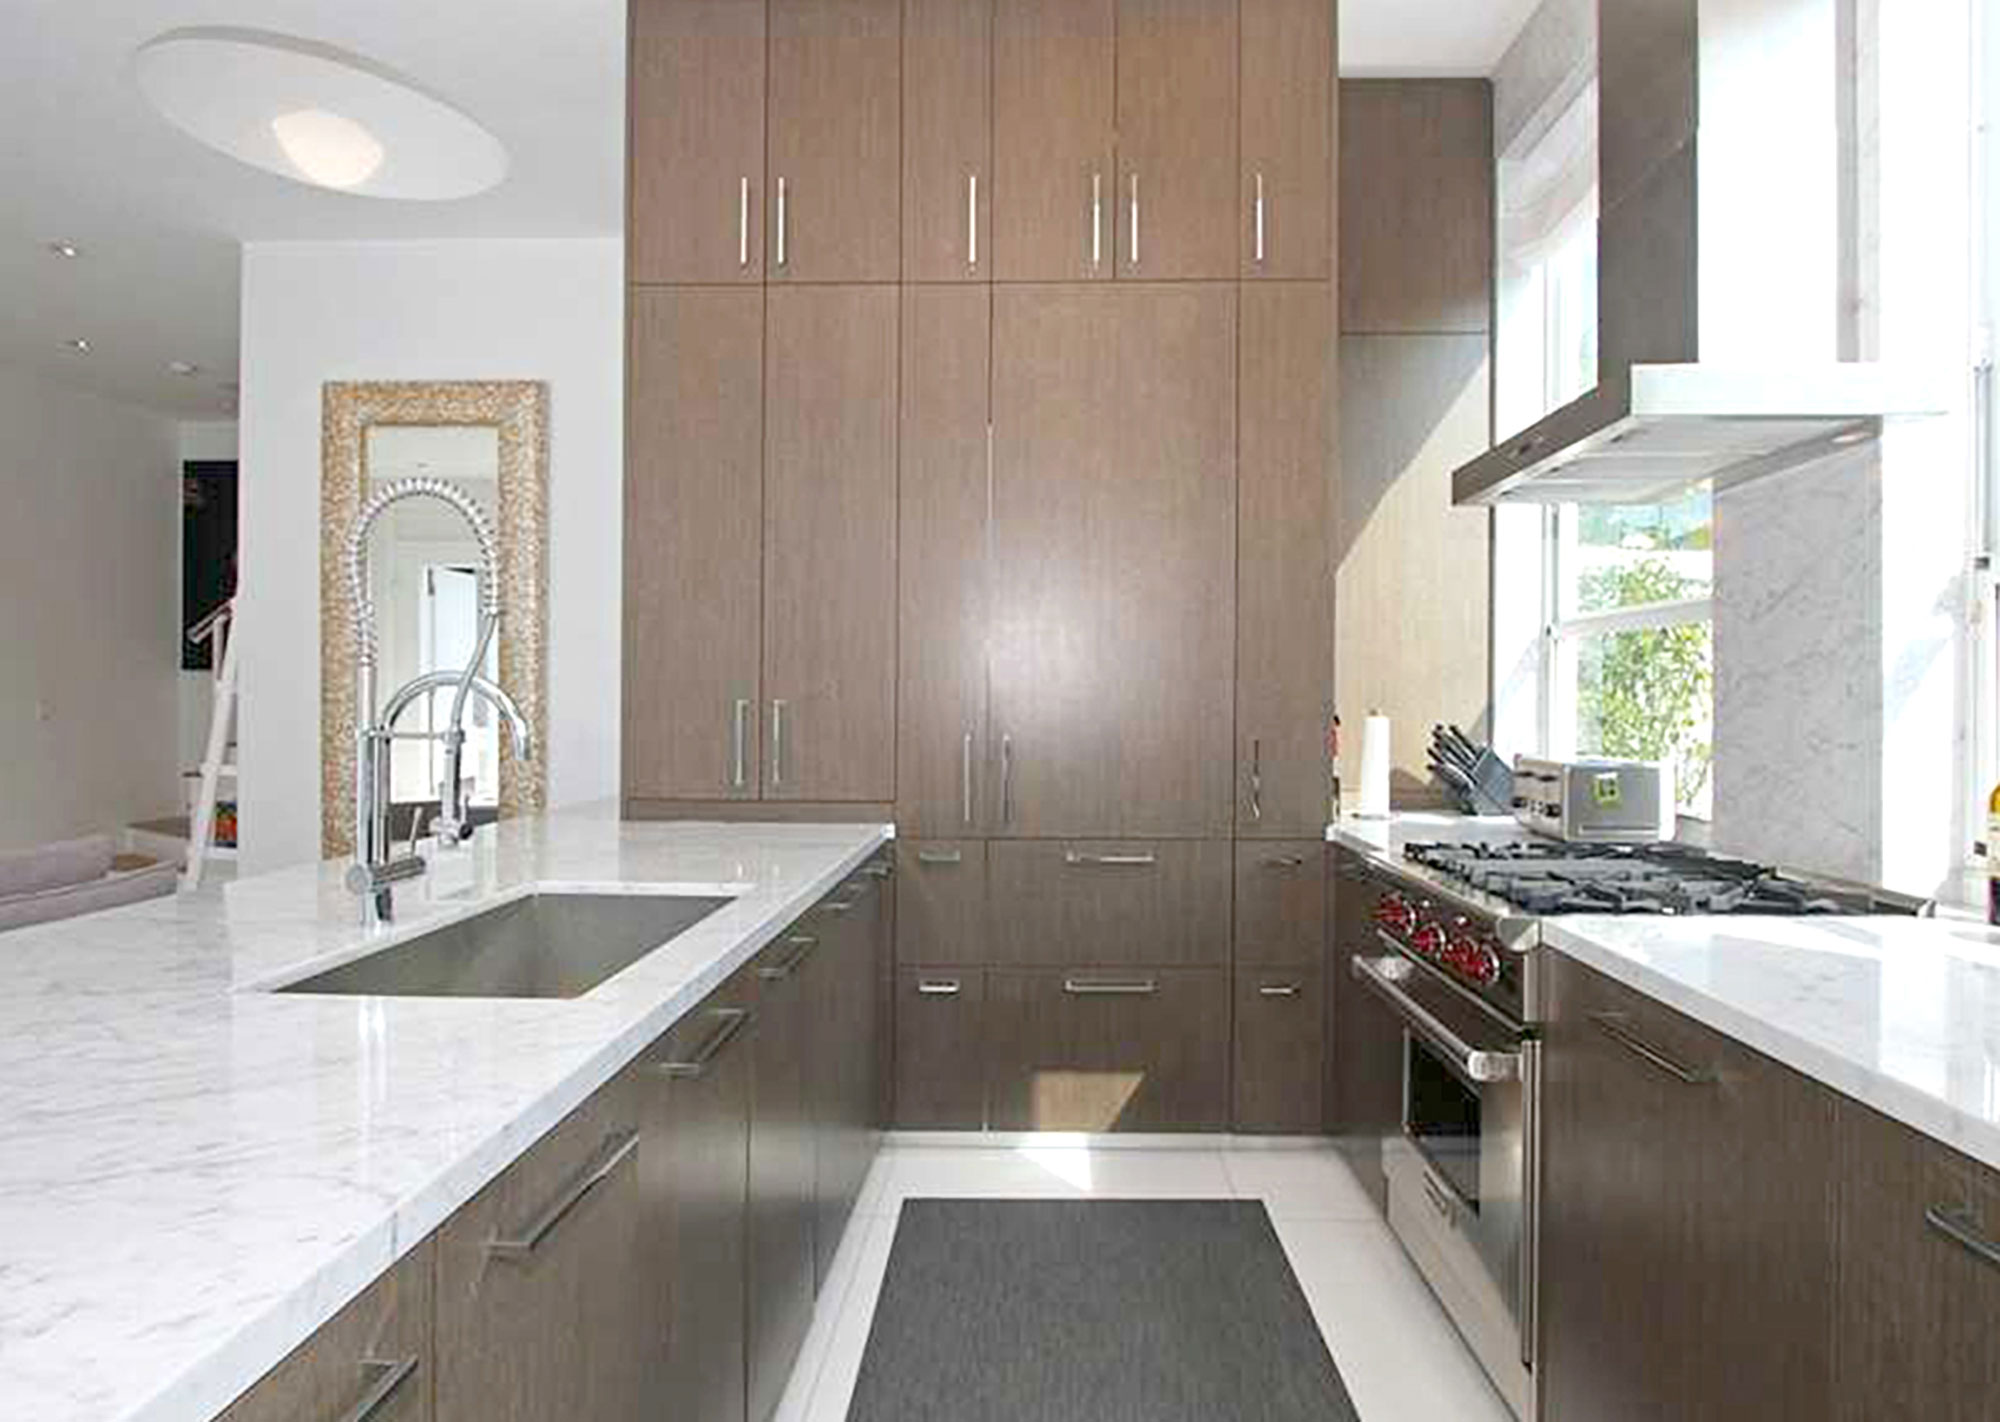 quality custom cabinetry, pantry cabinets, custom cabinets-north bay road 1